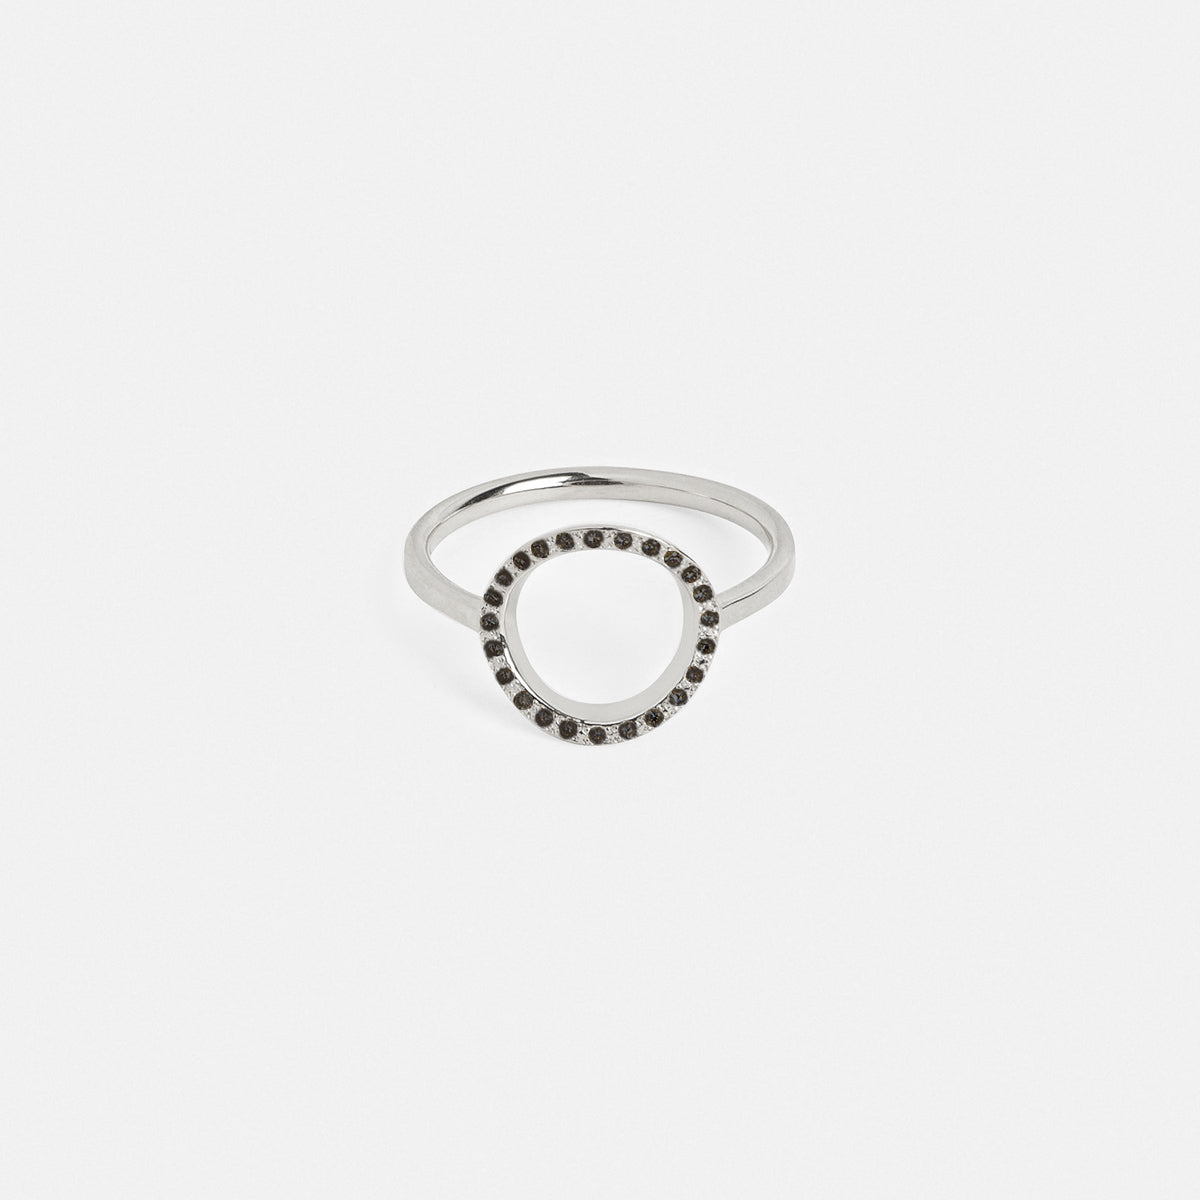  Nida Cool Ring in 14k White Gold set with Black Diamonds by SHW Fine Jewelry